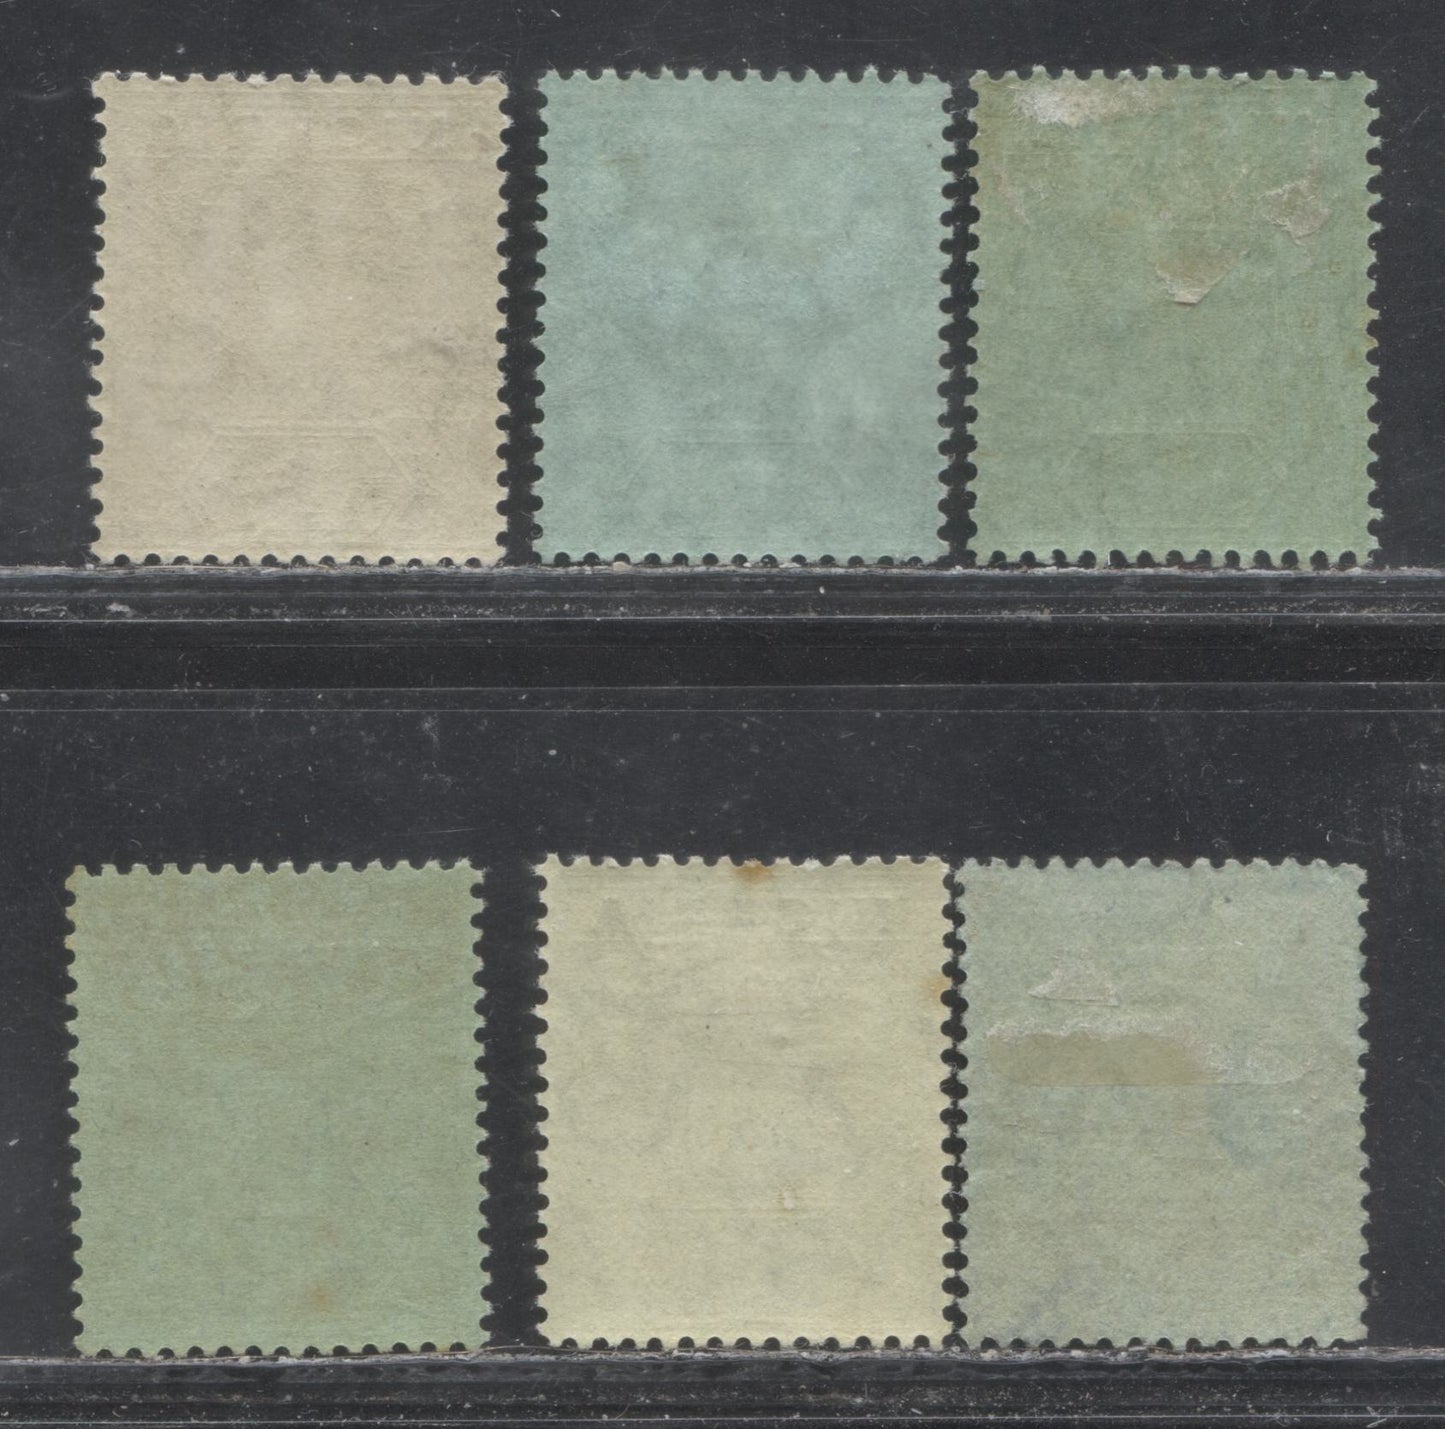 Nigeria SG#8a 1/- Gray Black On Yellow Green King George V Issue 1914-1922 De La Rue Imperium Keyplate Design, A VF Example With A Blue-Green Paper For Contrast